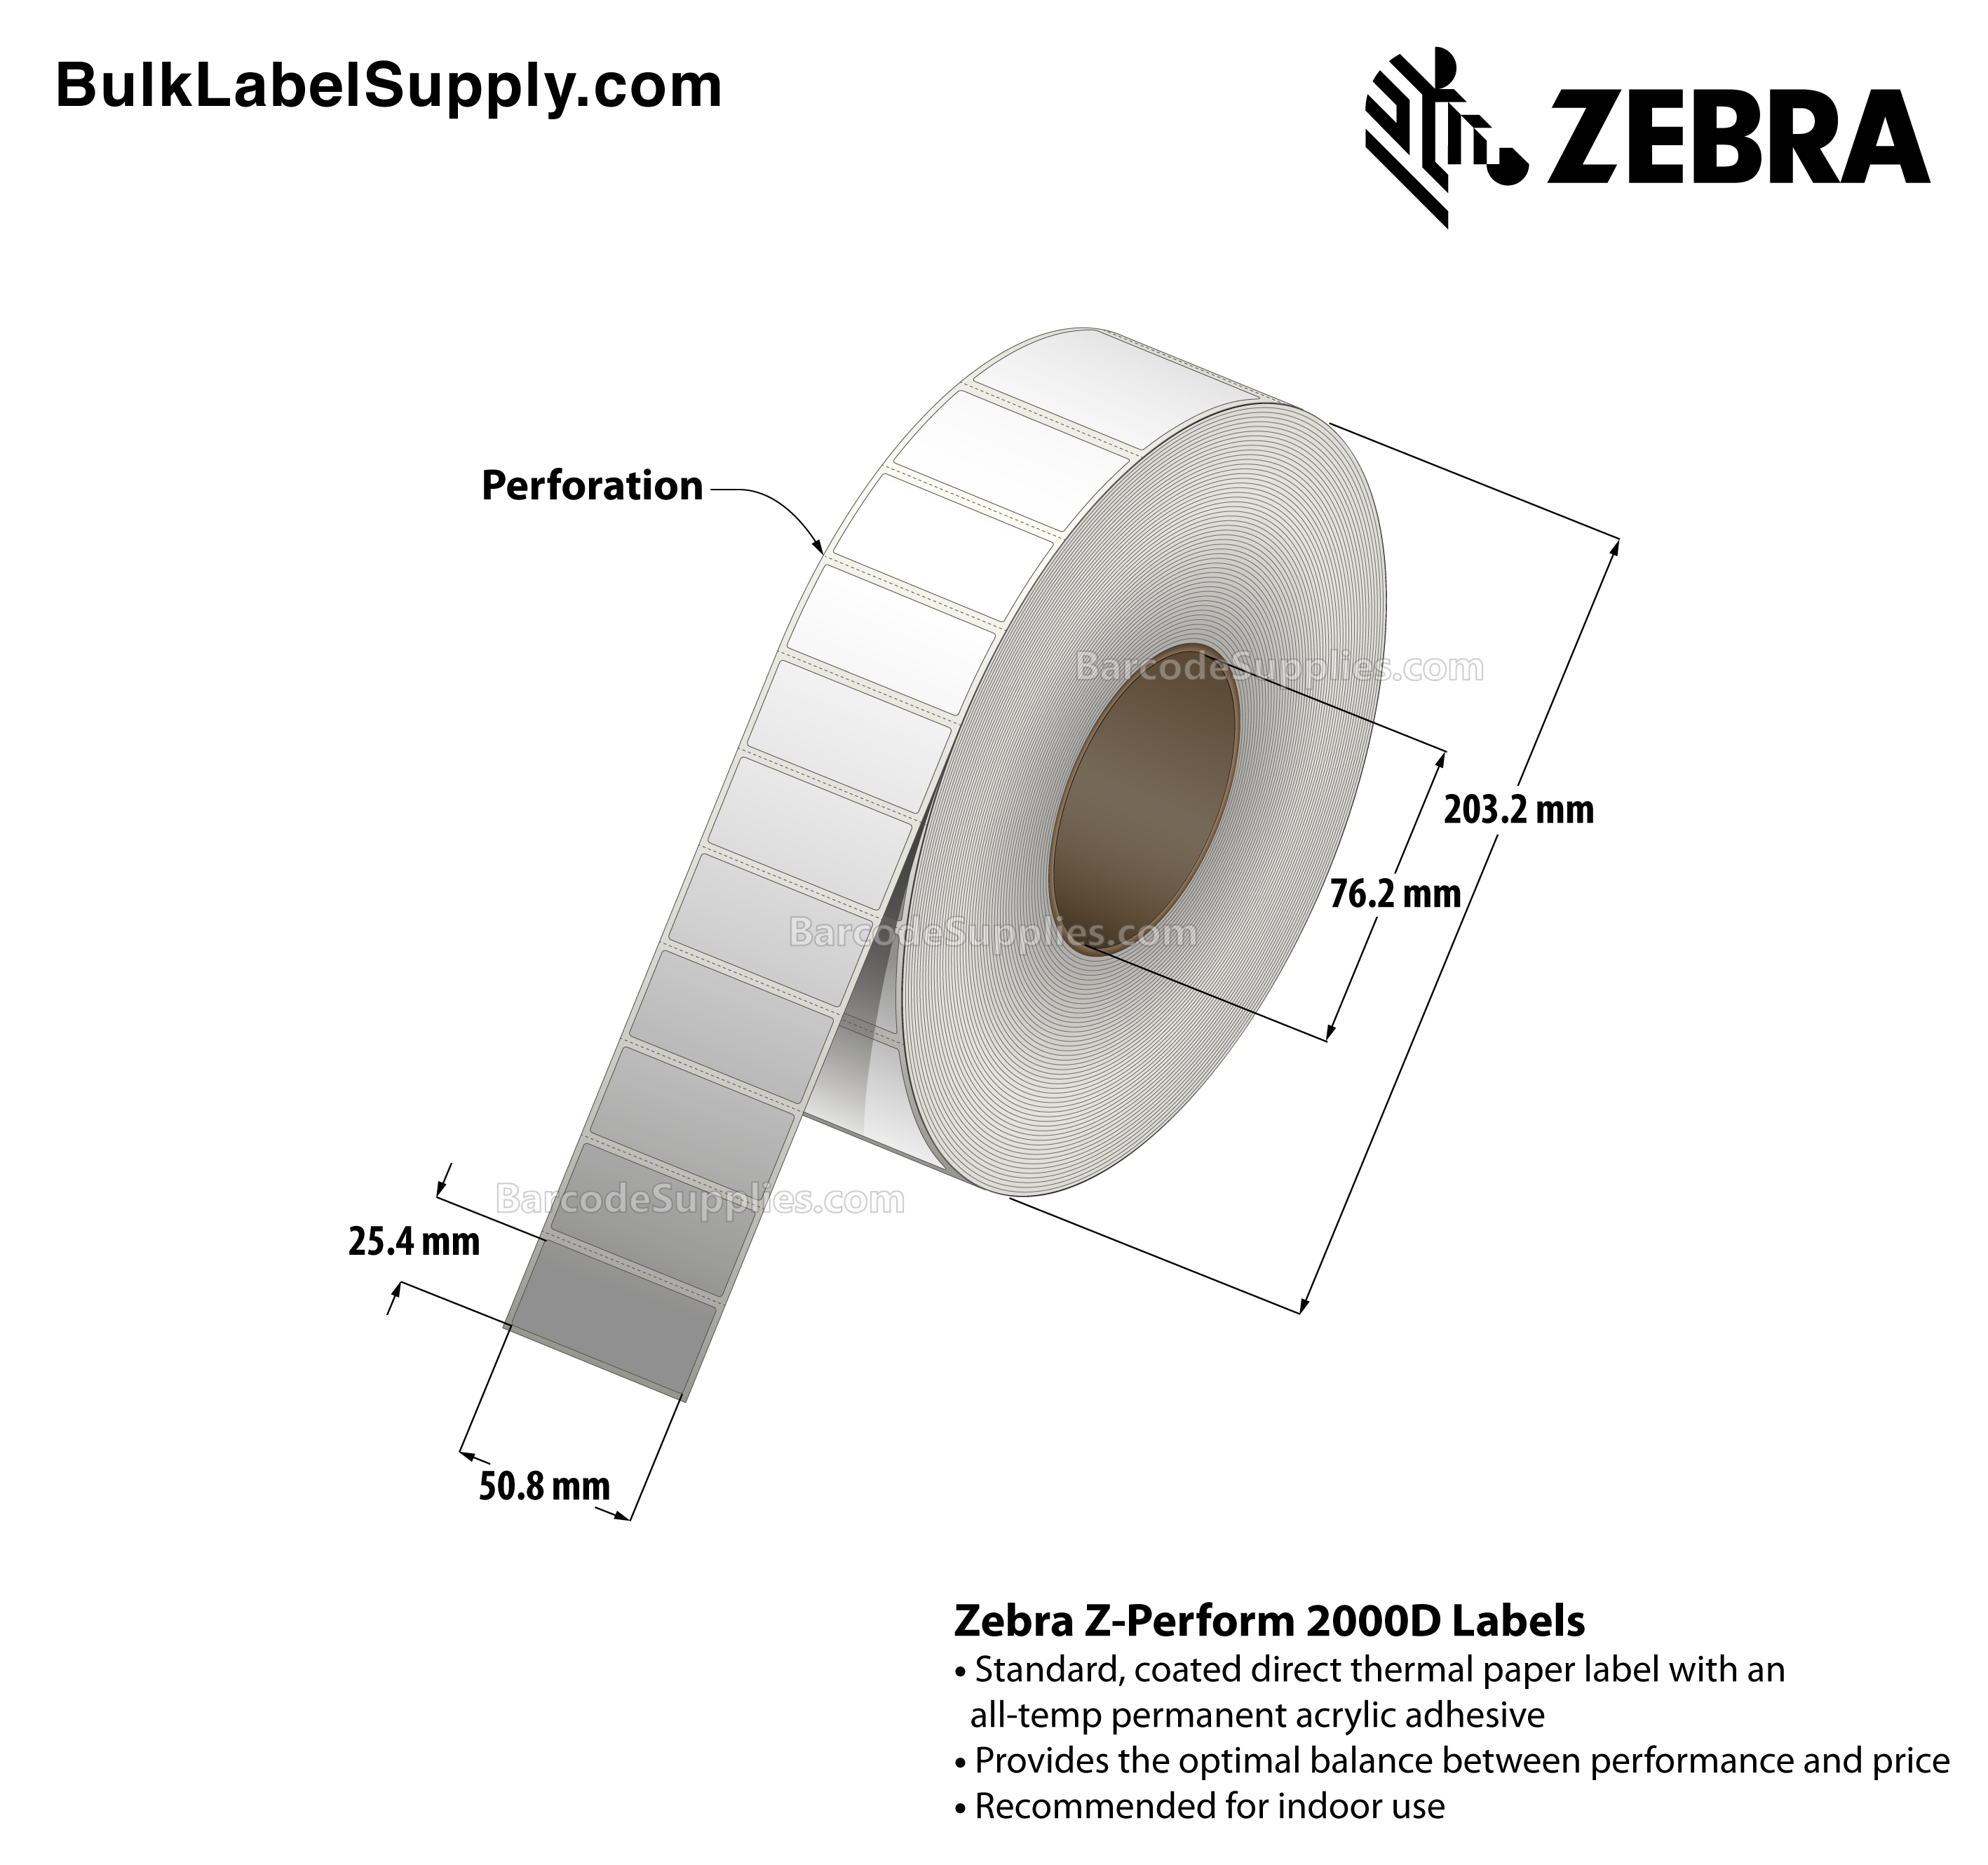 2 x 1 Direct Thermal White Z-Perform 2000D Labels With All-Temp Adhesive - Perforated - 5500 Labels Per Roll - Carton Of 8 Rolls - 44000 Labels Total - MPN: 10000298